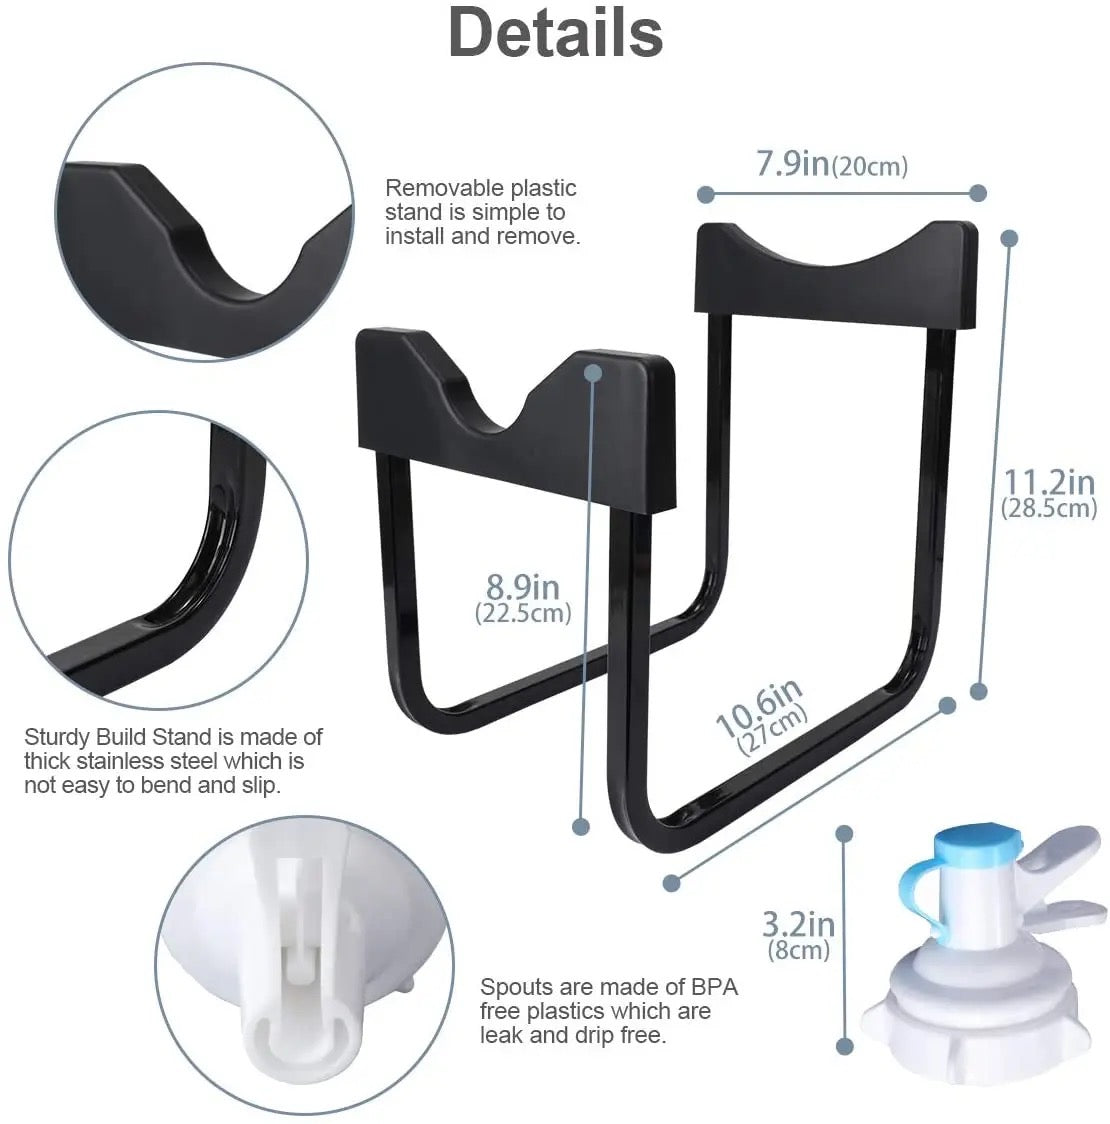 Water Bottle Dispenser Stand Details and Size